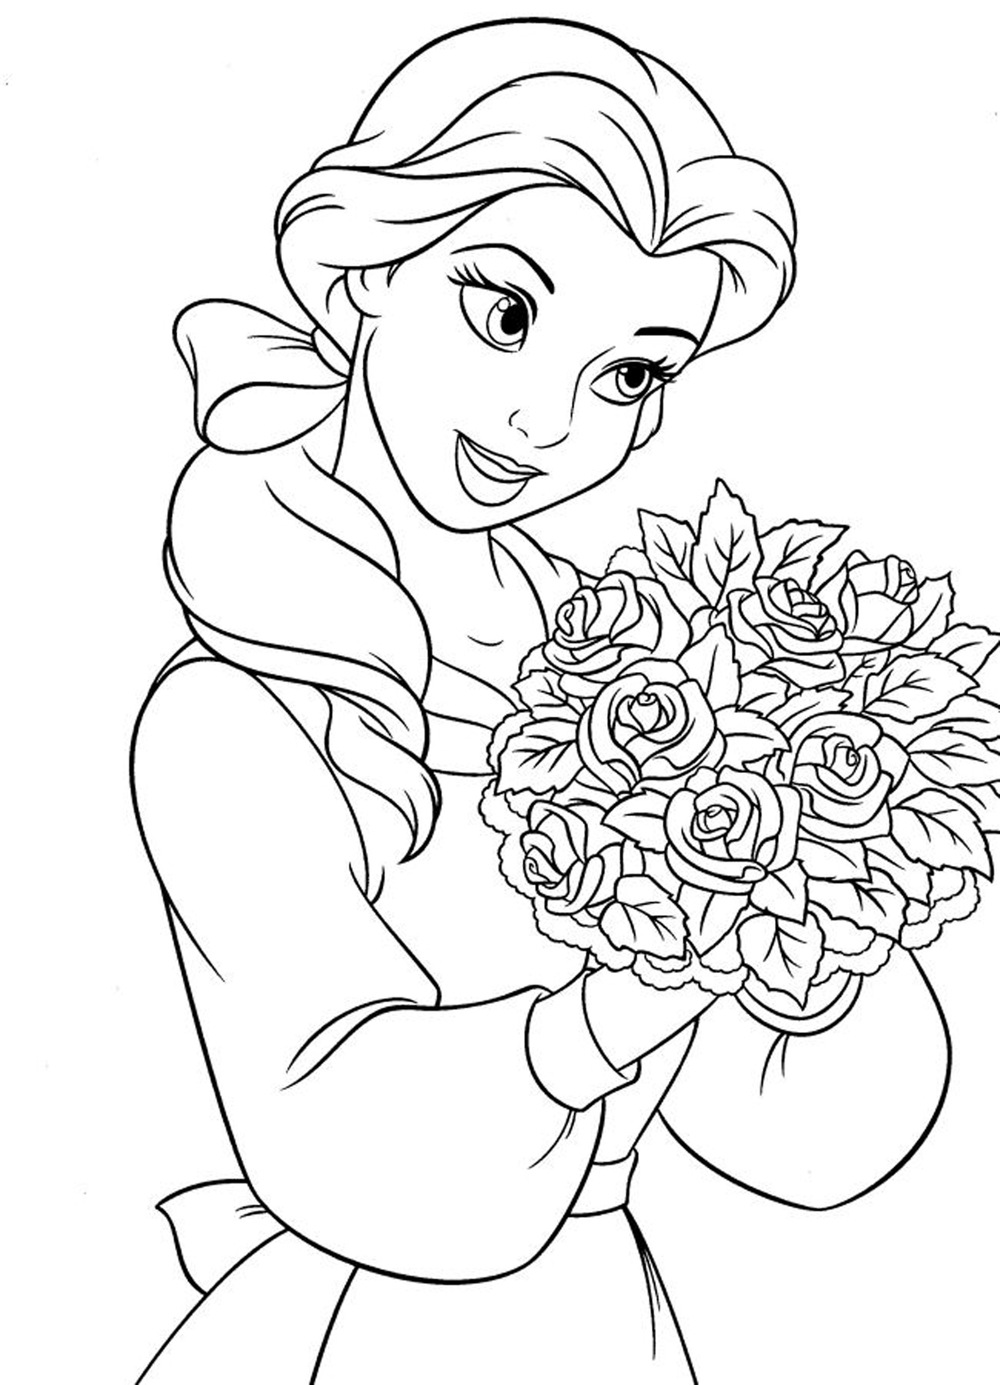 princess-colouring-pictures-to-print